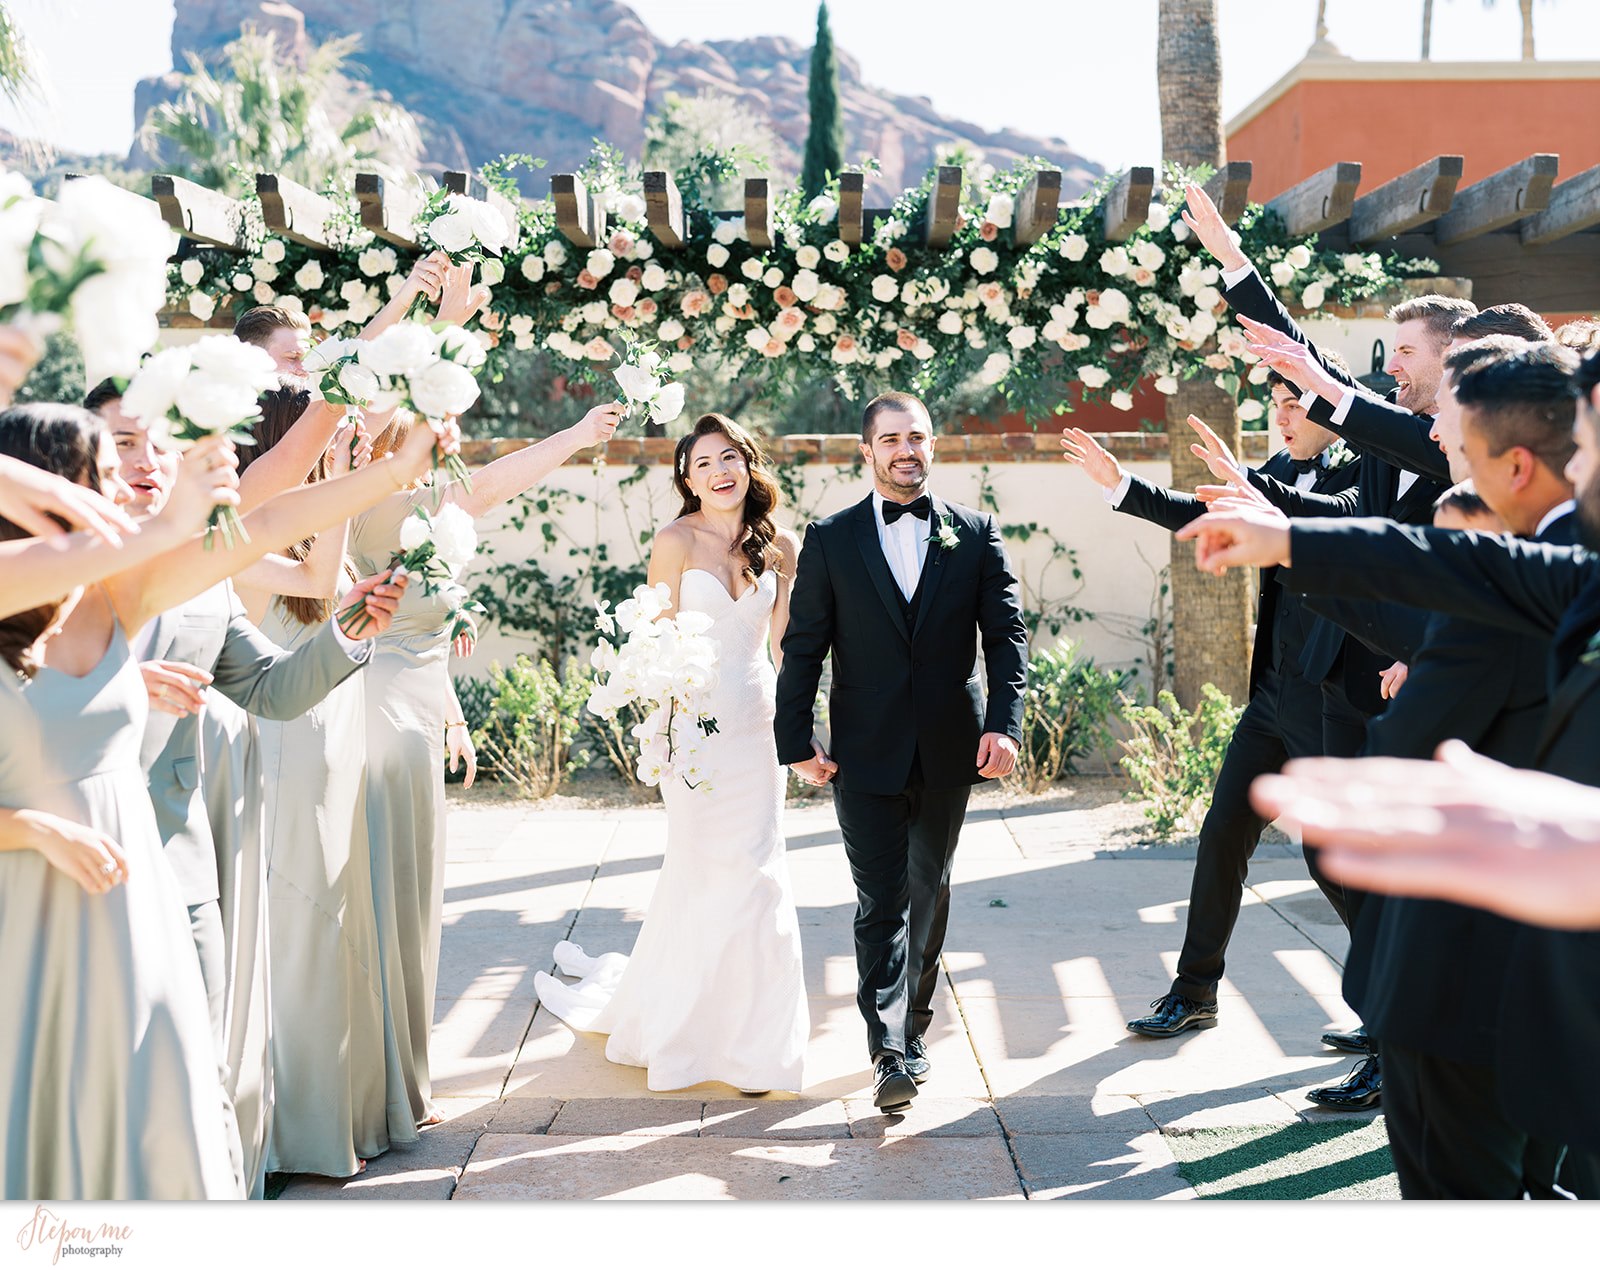 Bride and groom holding hands, smiling, walking between groomsmen and bridesmaids holding hands up above in celebration.